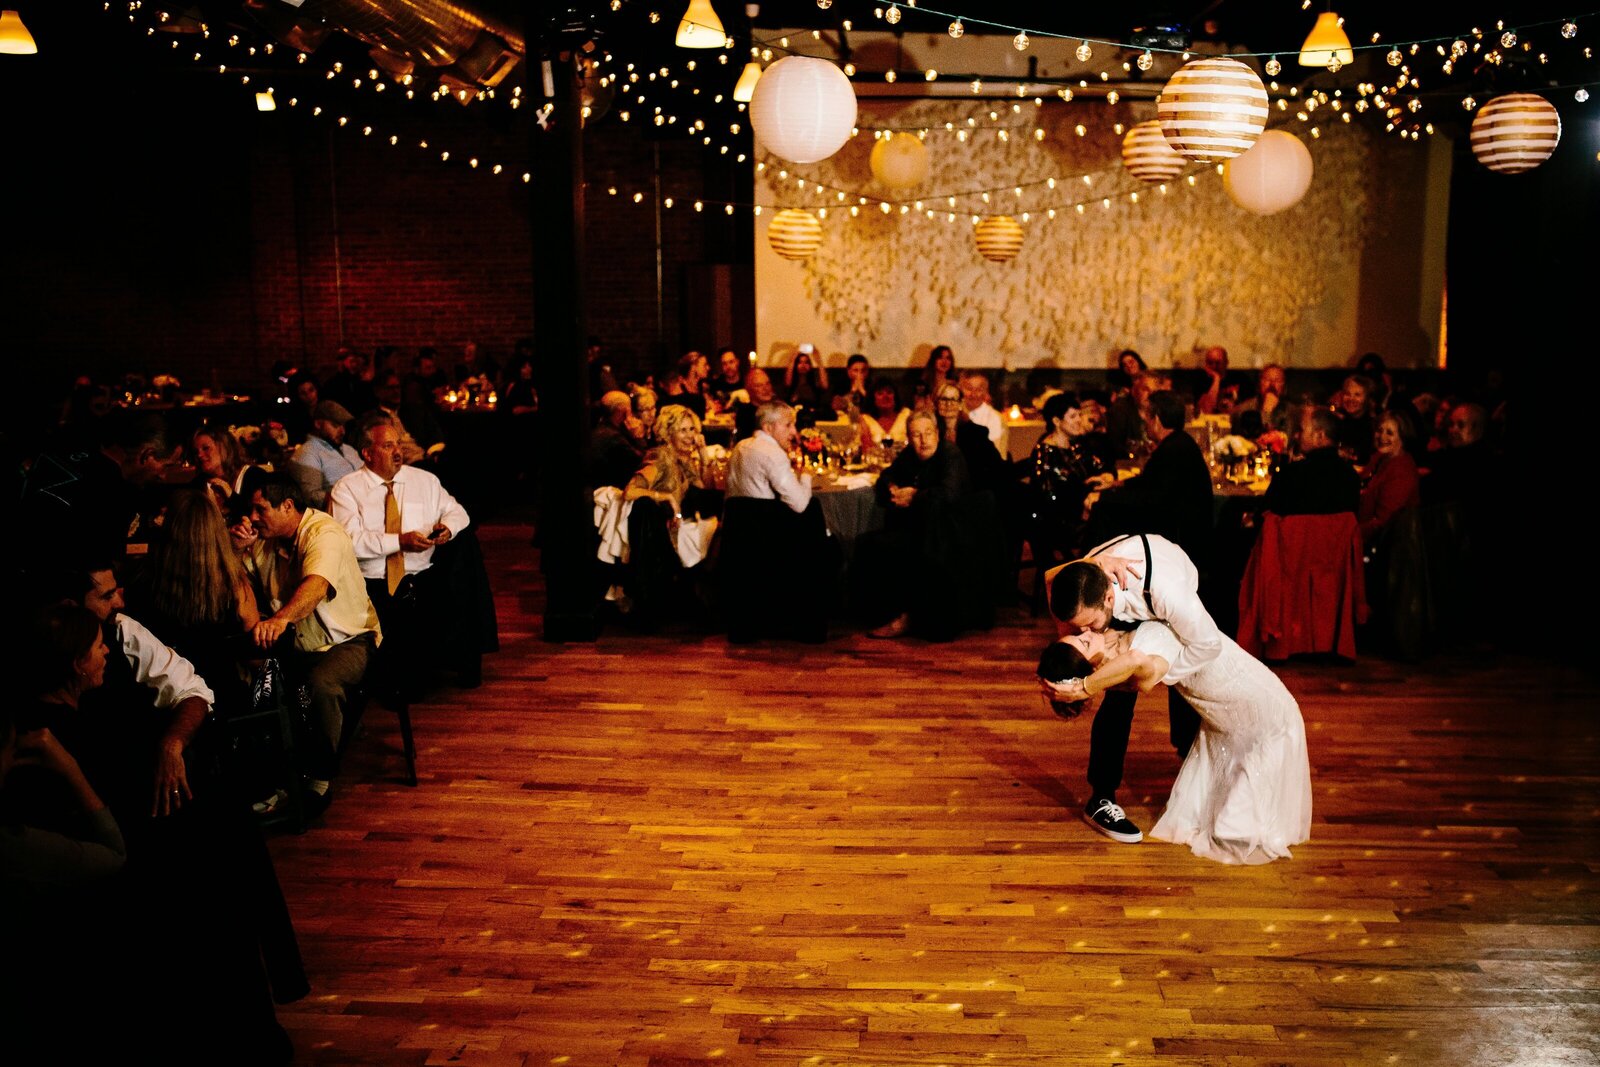 Bride and groom take their first dance as a married couple